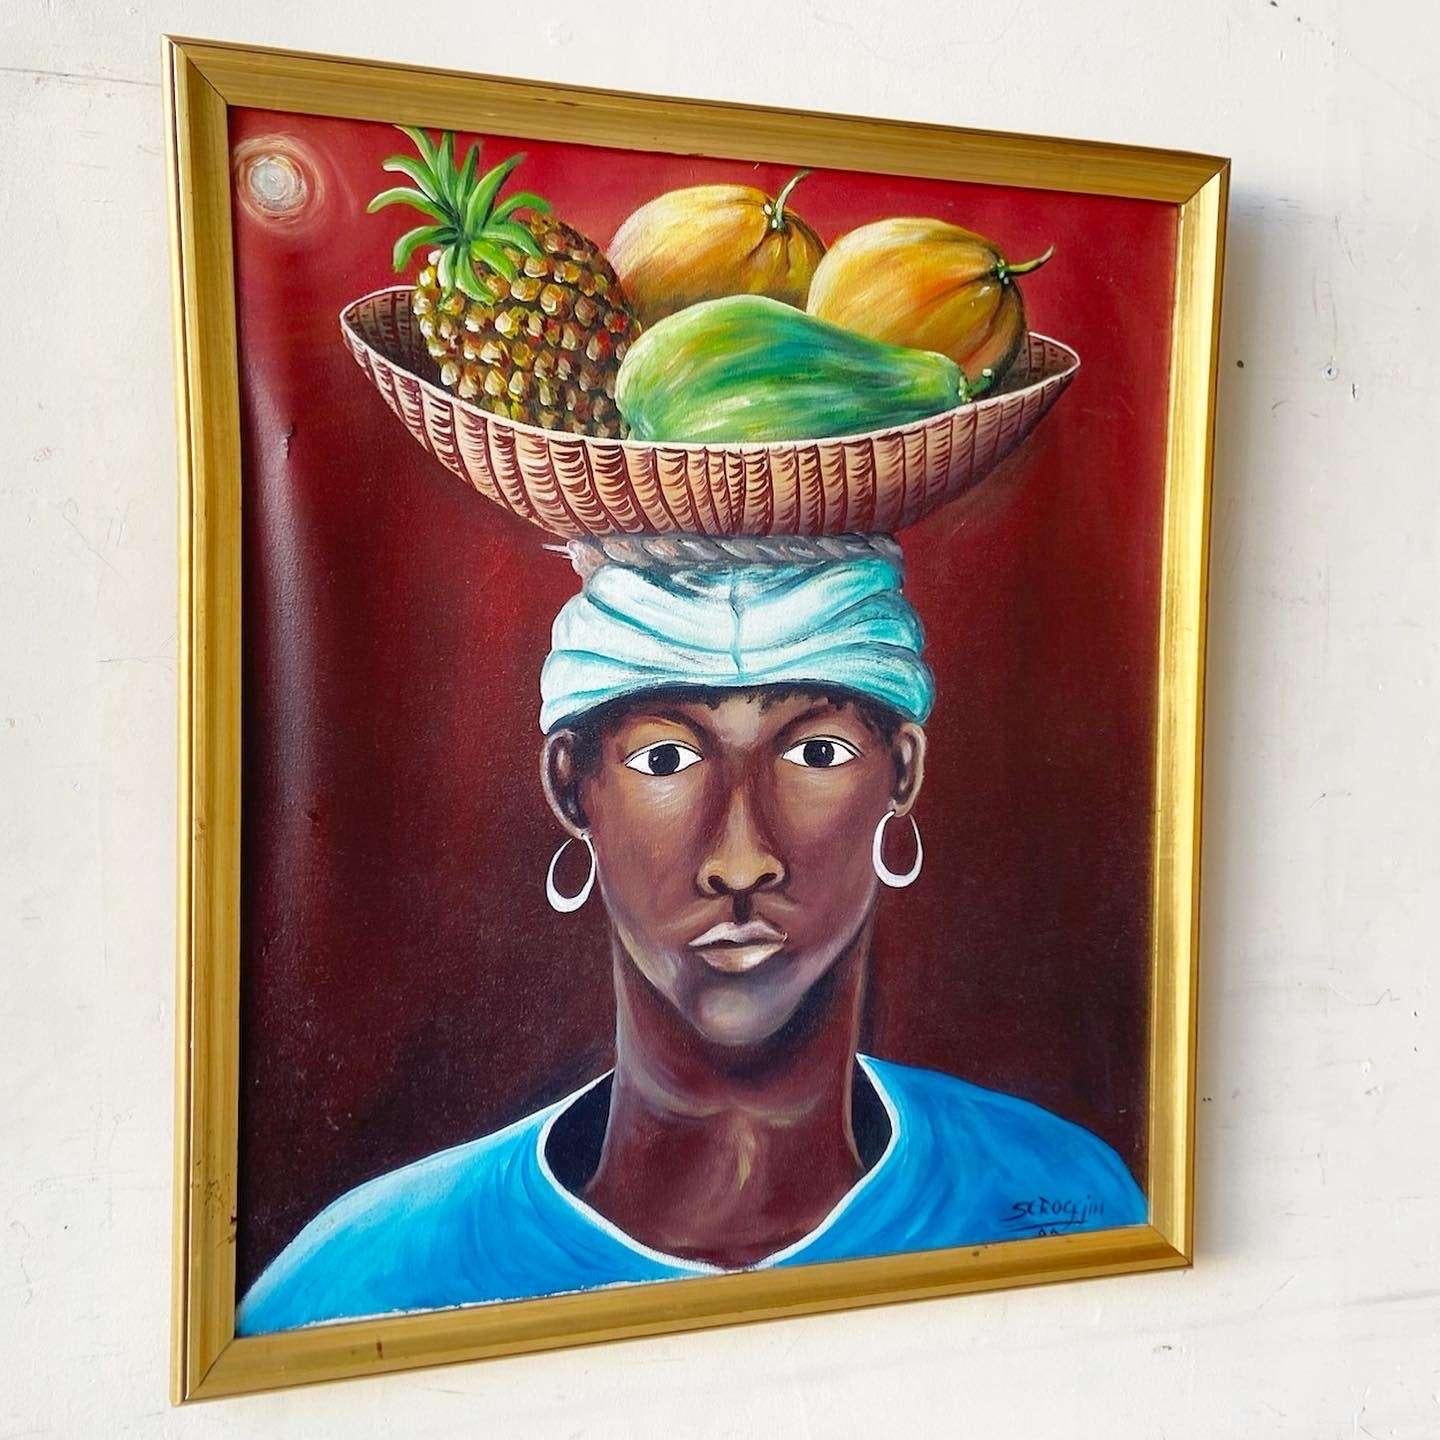 Exceptional framed original oil painting by Scroggin. Subject is a Caribbean woman with a bow of fruit on her head.
